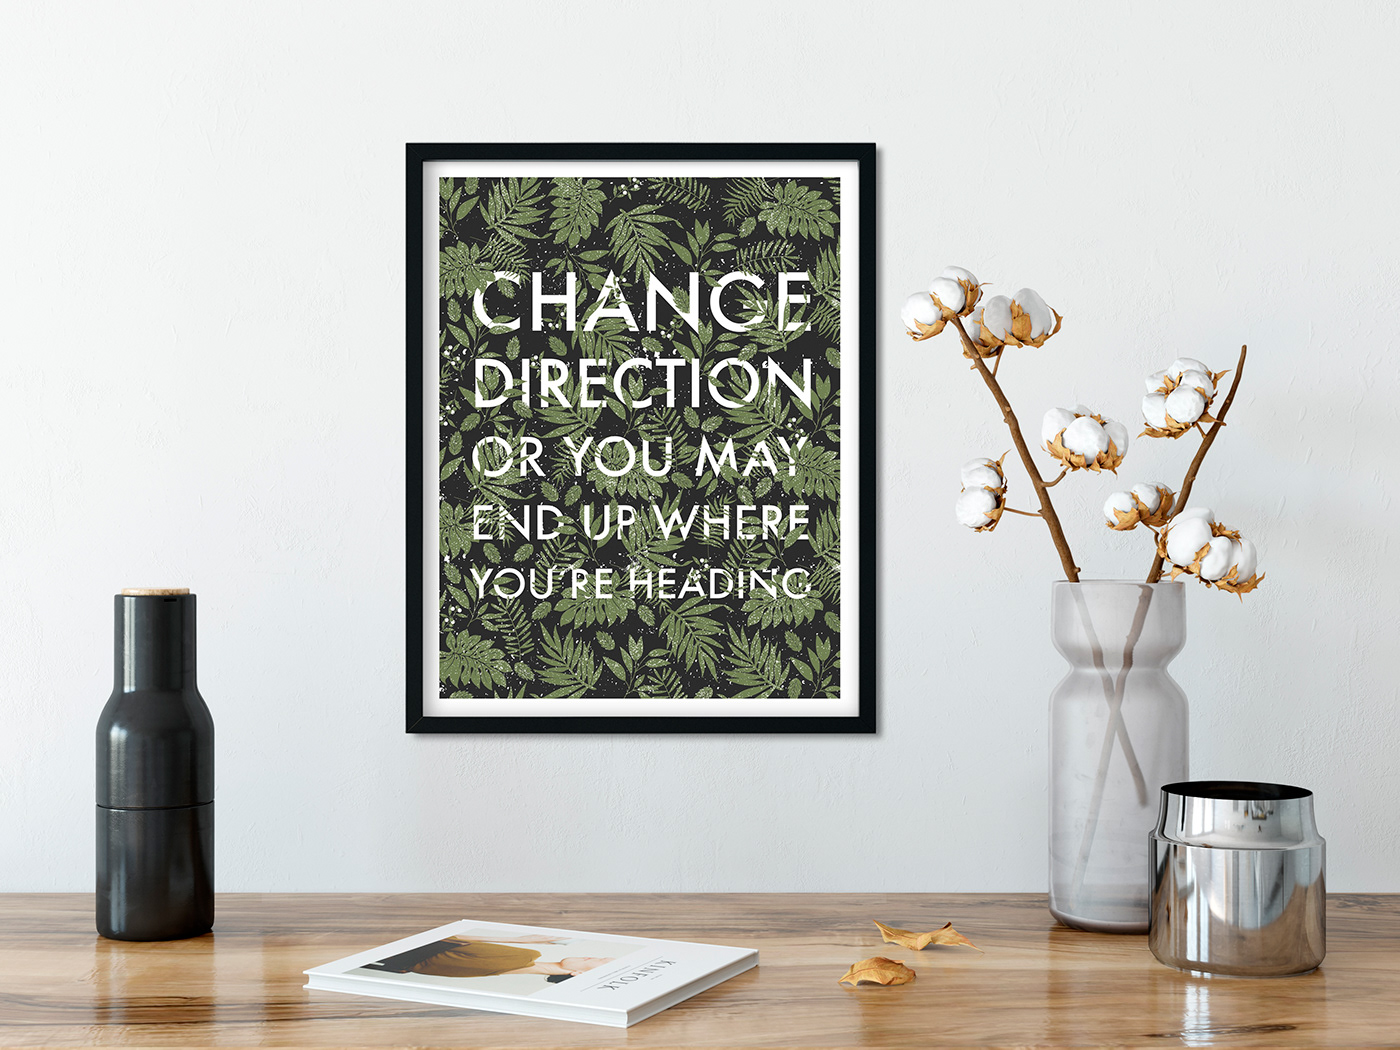 textile quote inspiration floral pattern change direction screen print silk screen poster Toronto Canada philosopher